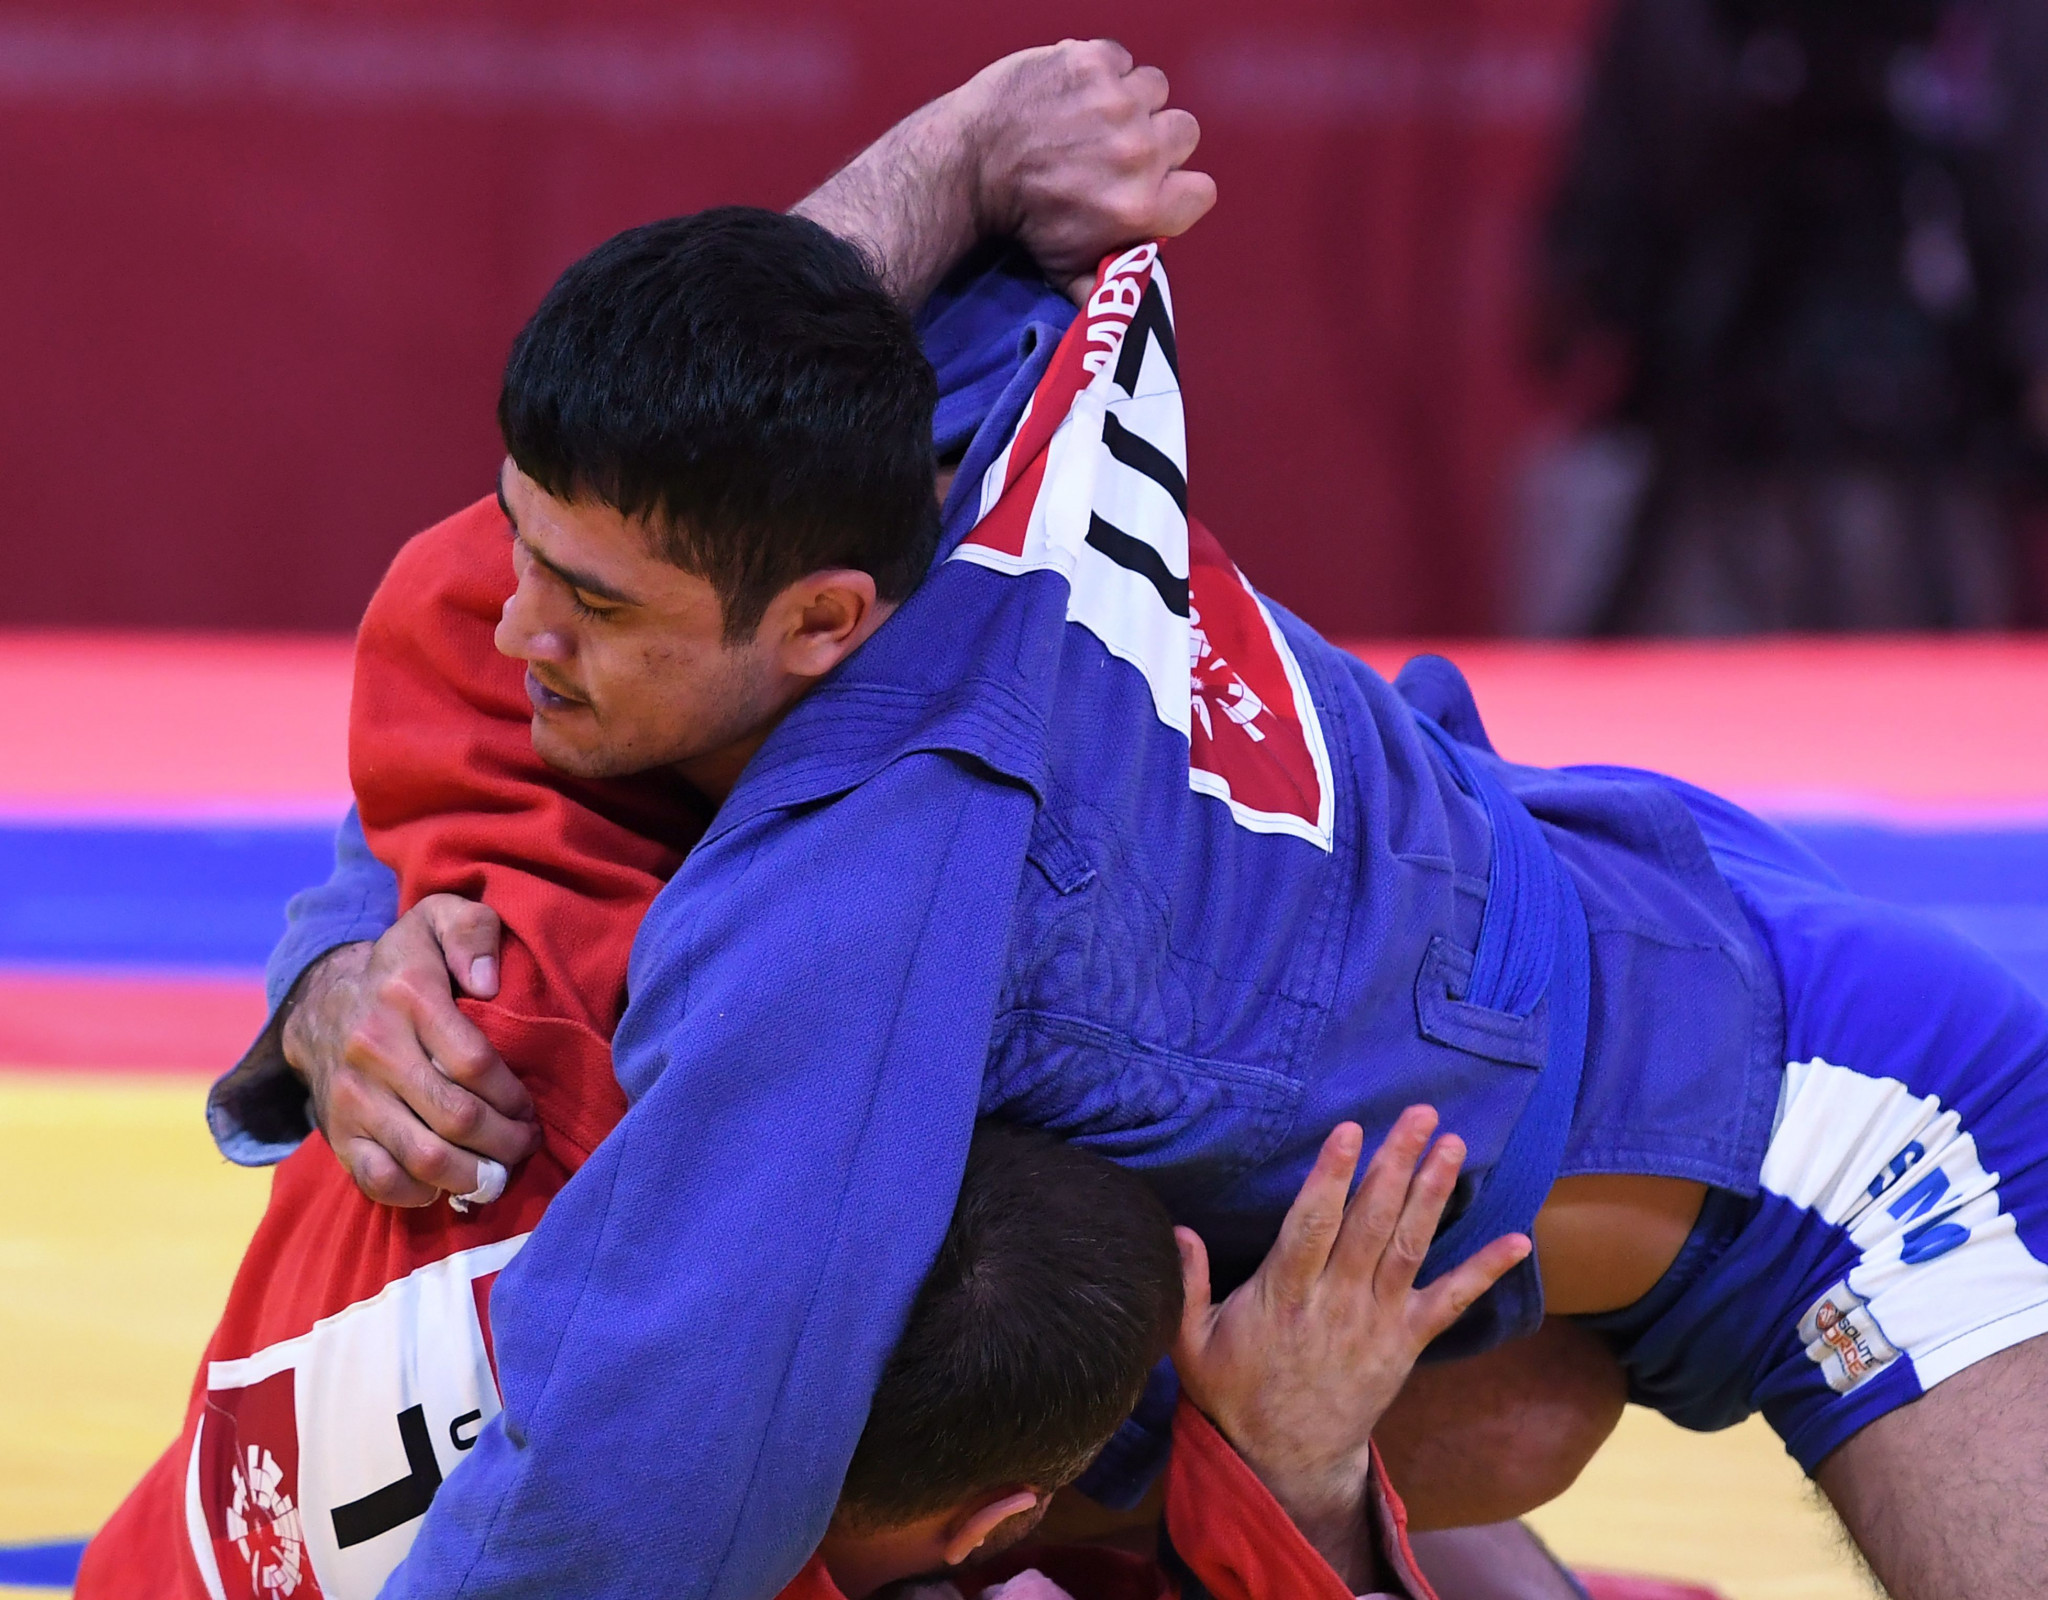 The World Sambo Championships have moved from Moscow to Tashkent ©Getty Images